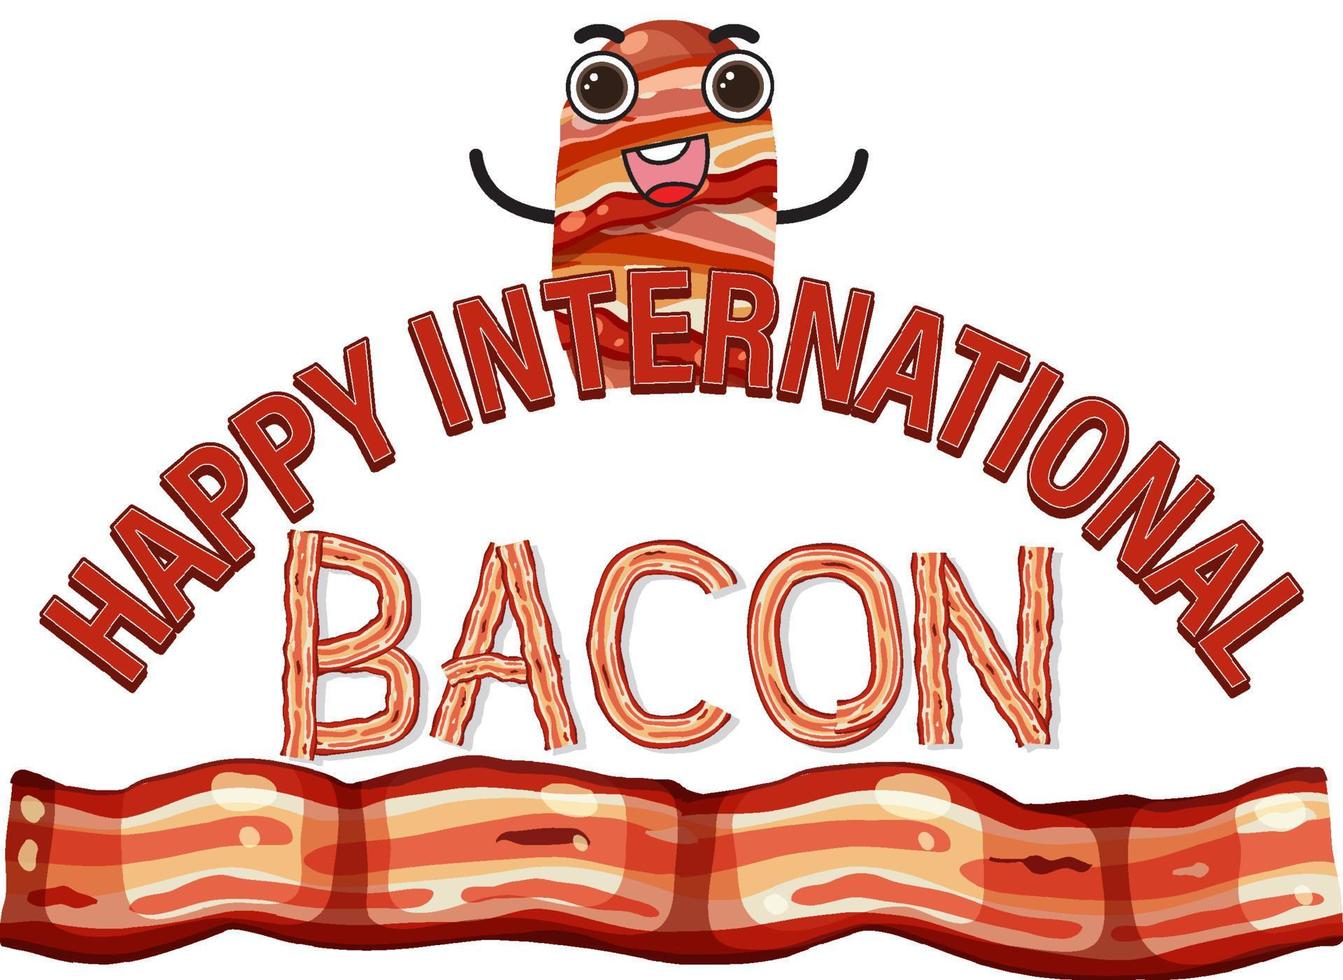 International bacon day poster template vector